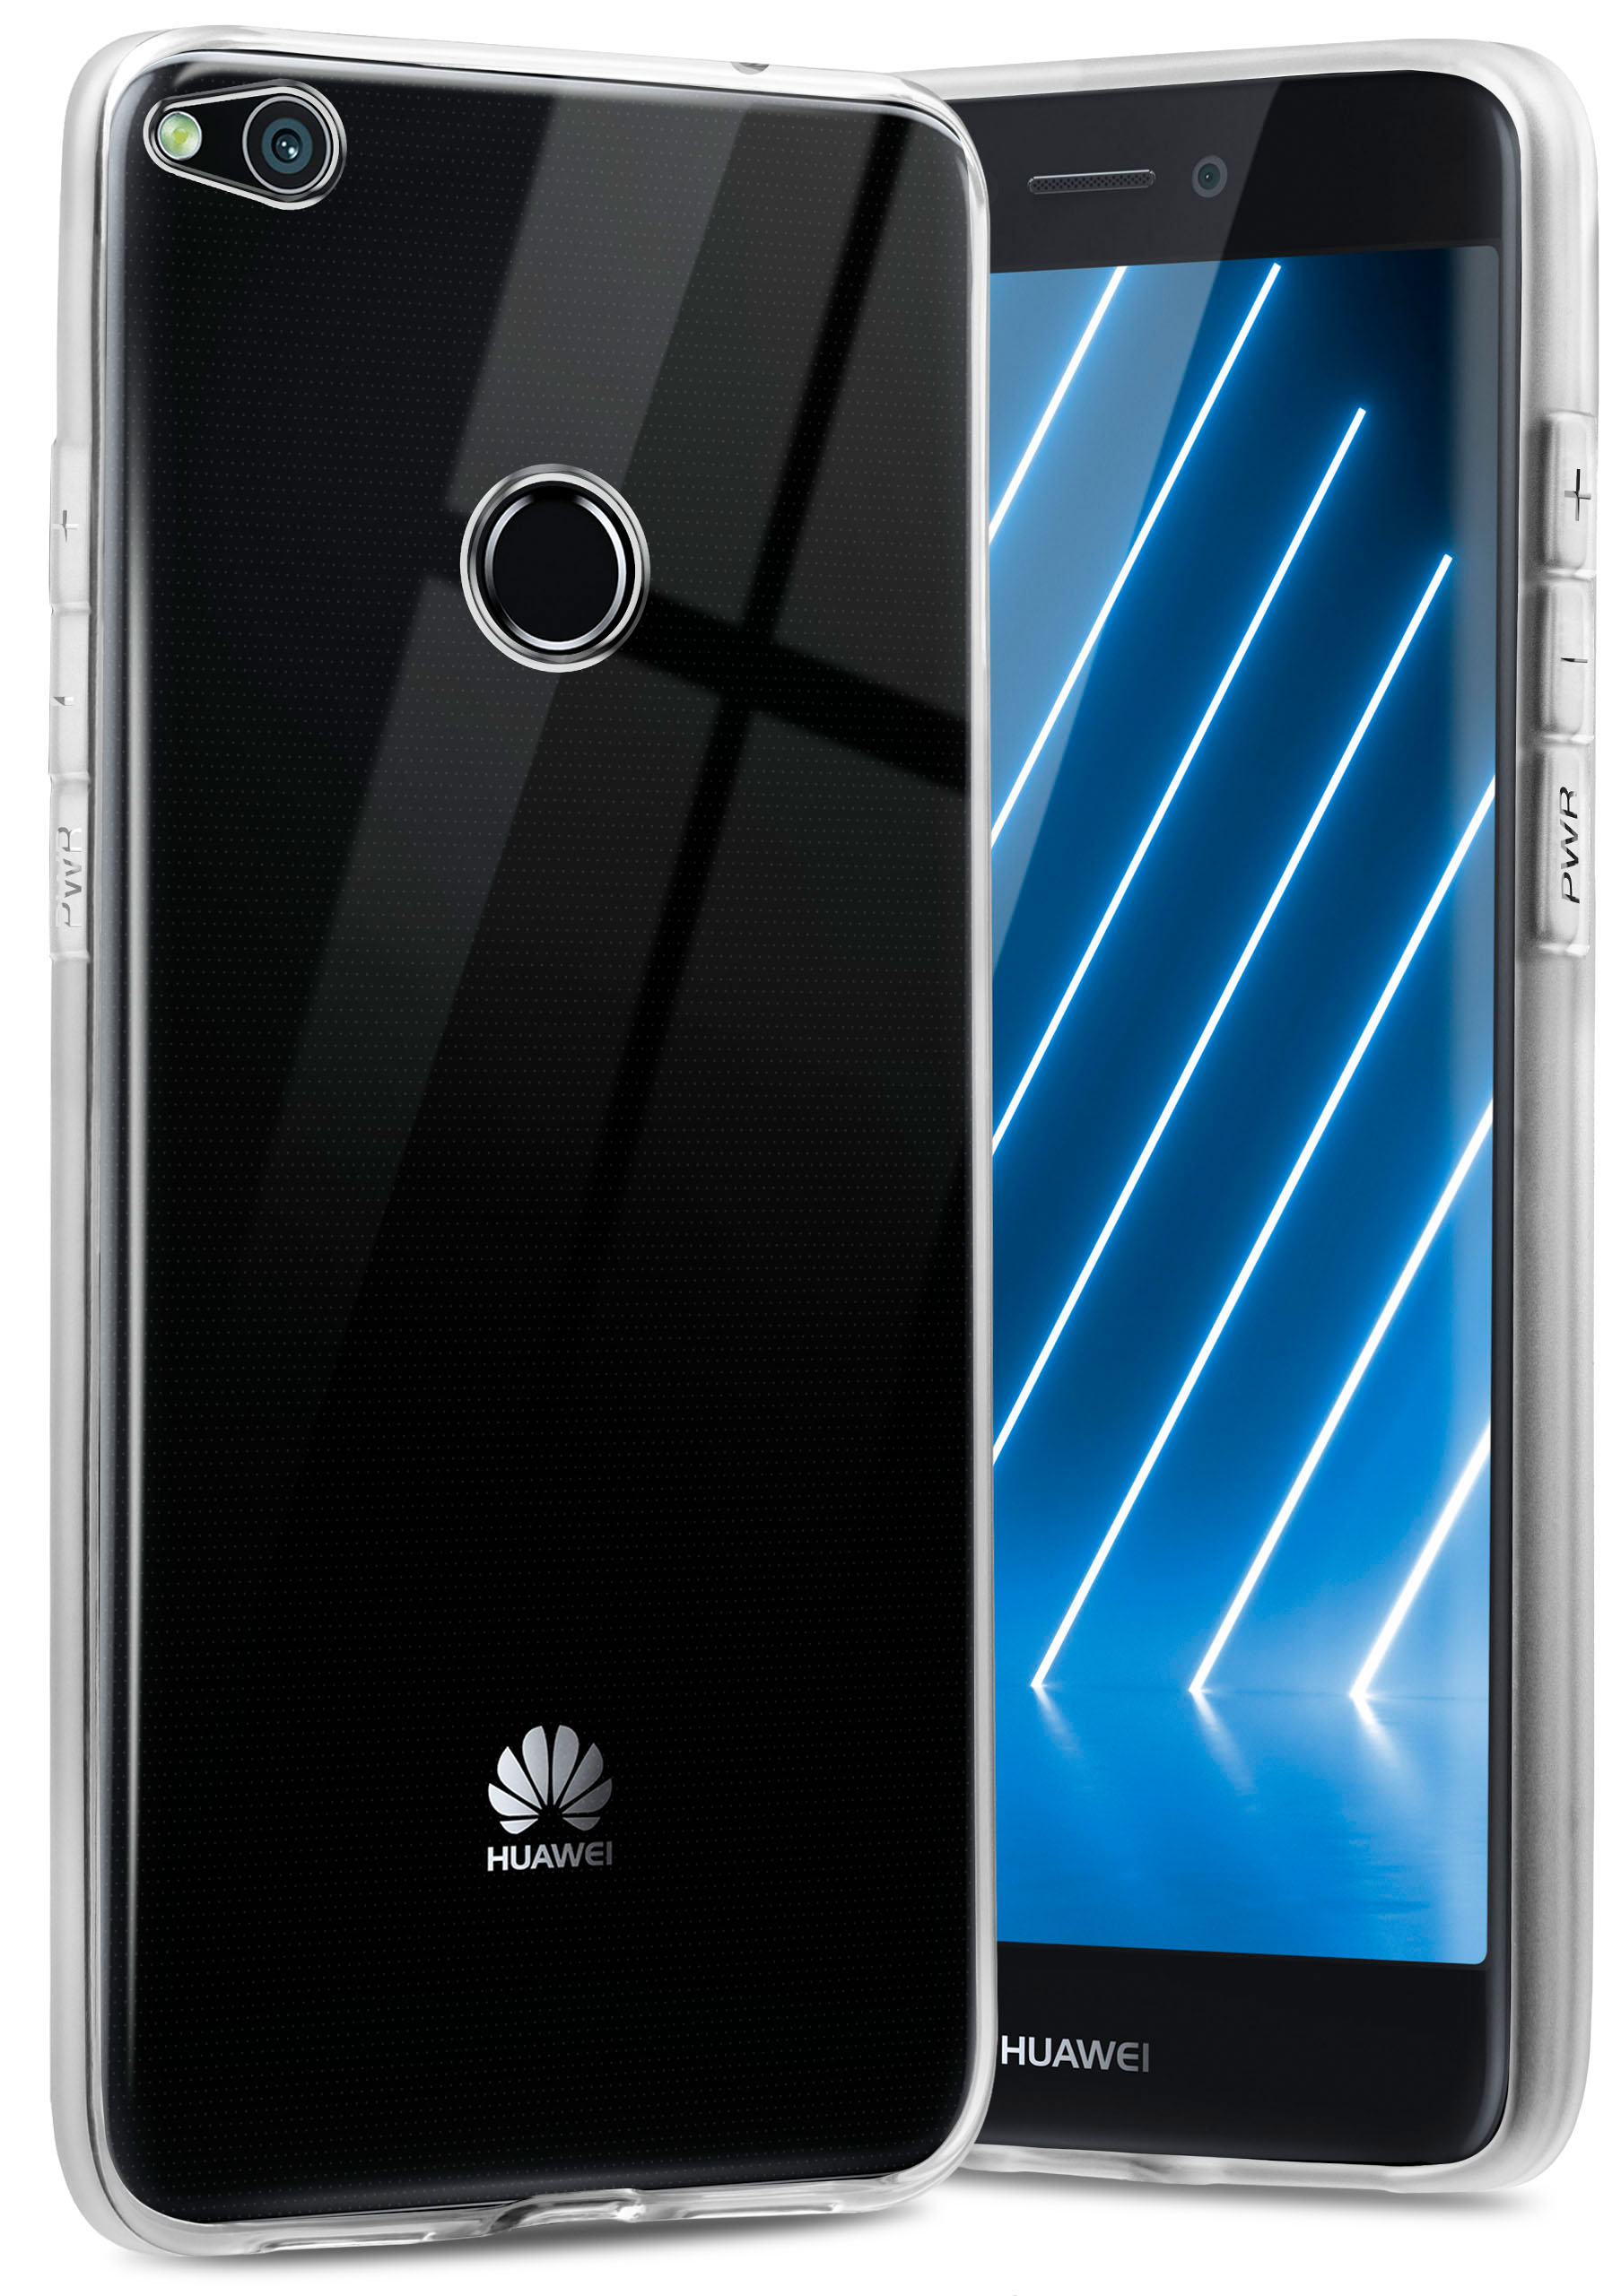 Backcover, ONEFLOW Huawei, P8 2017, Lite Crystal-Clear Clear Case,